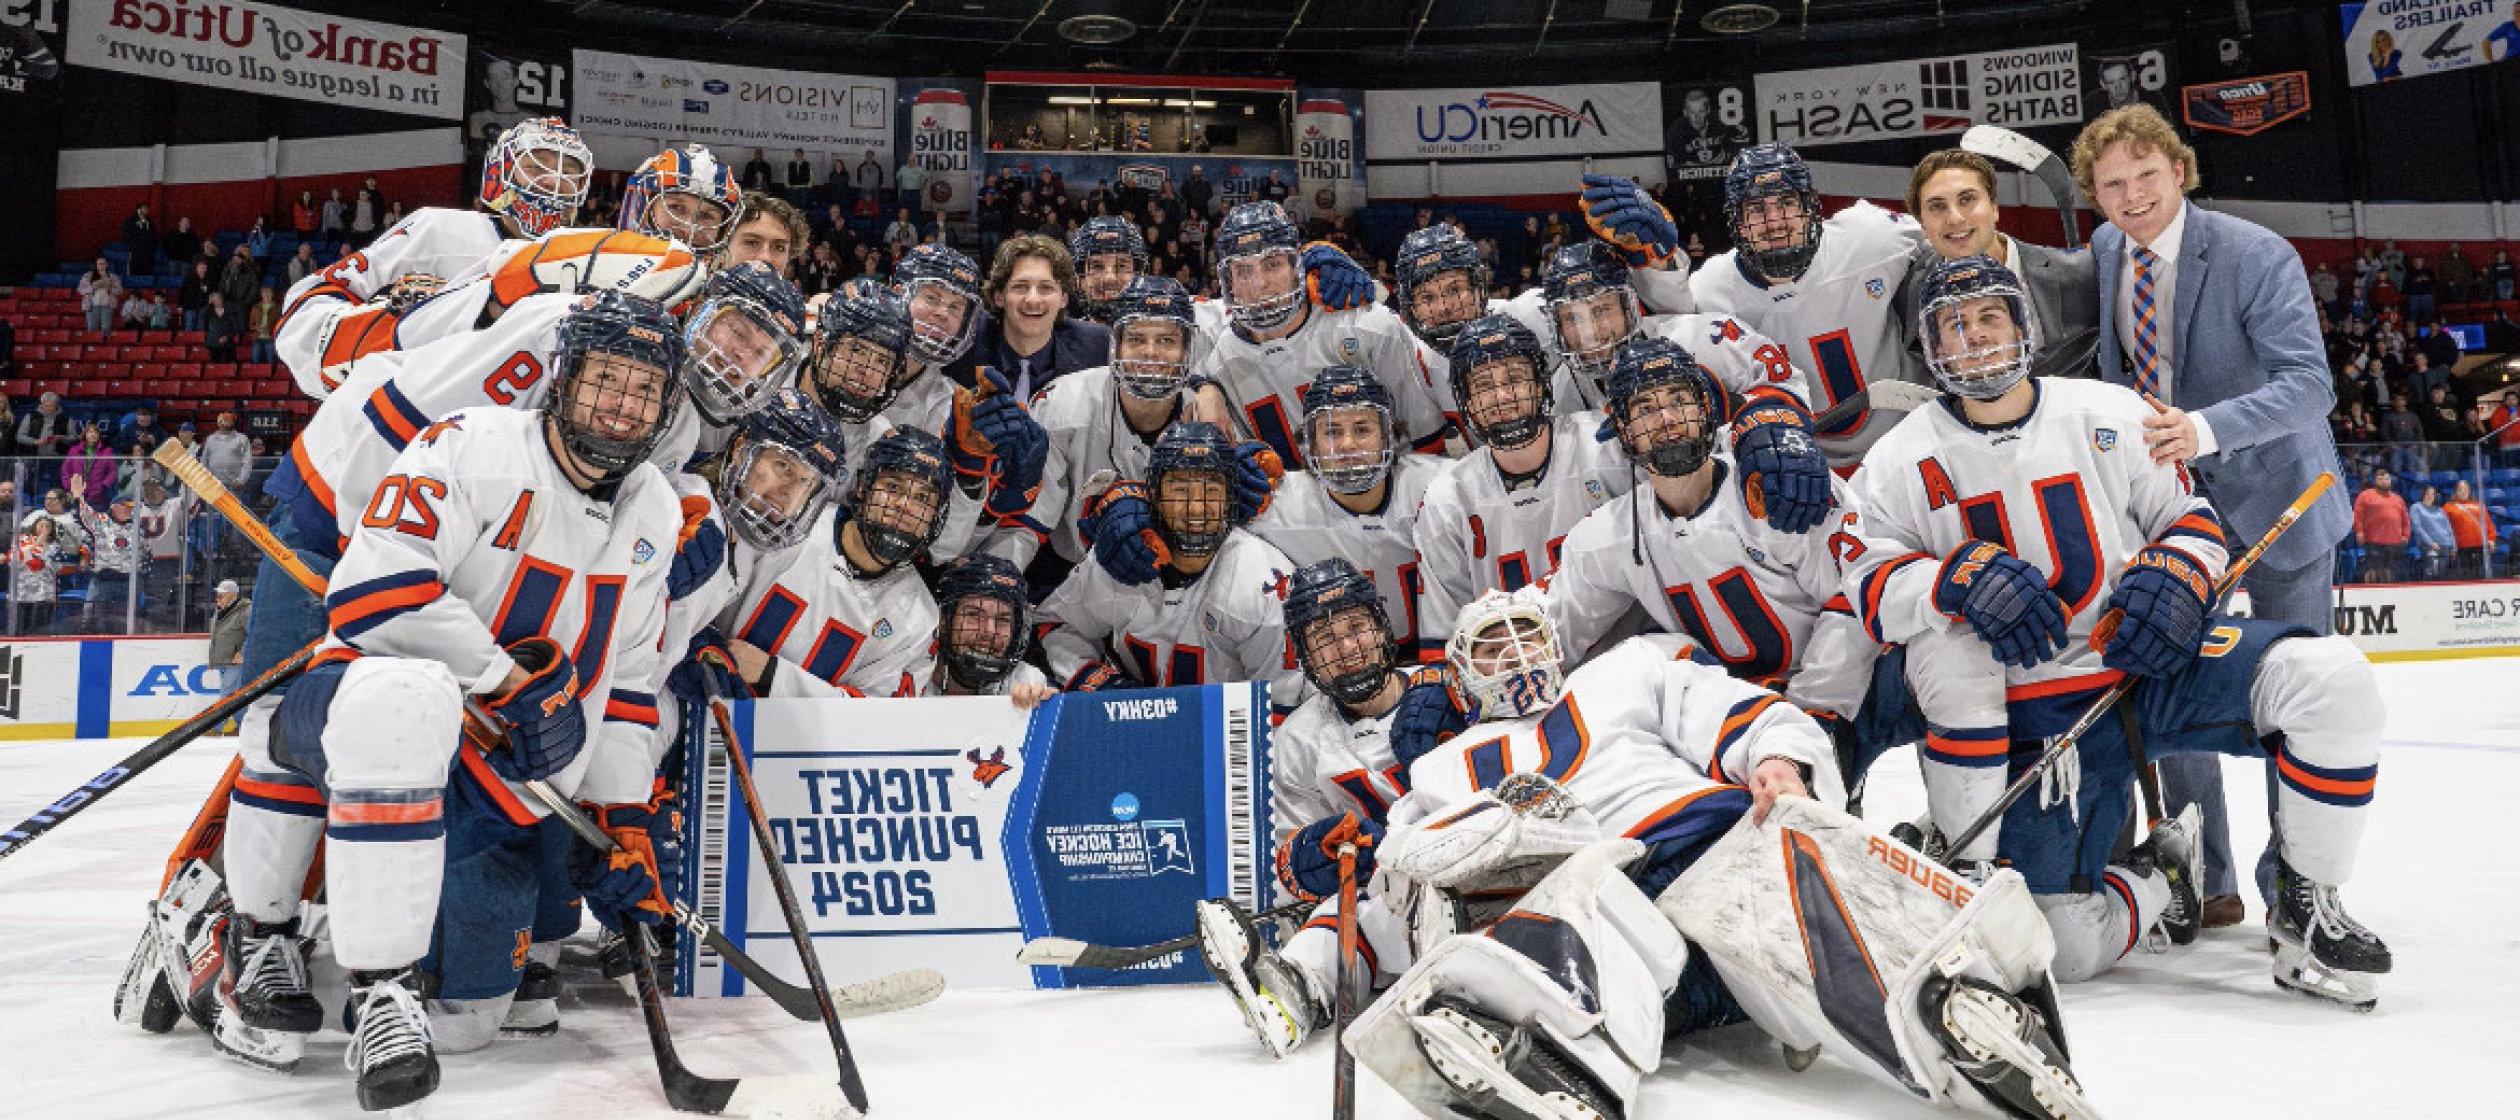 Pioneers Hockey group photo on the ice as they advance to the NCAA Frozen Four.